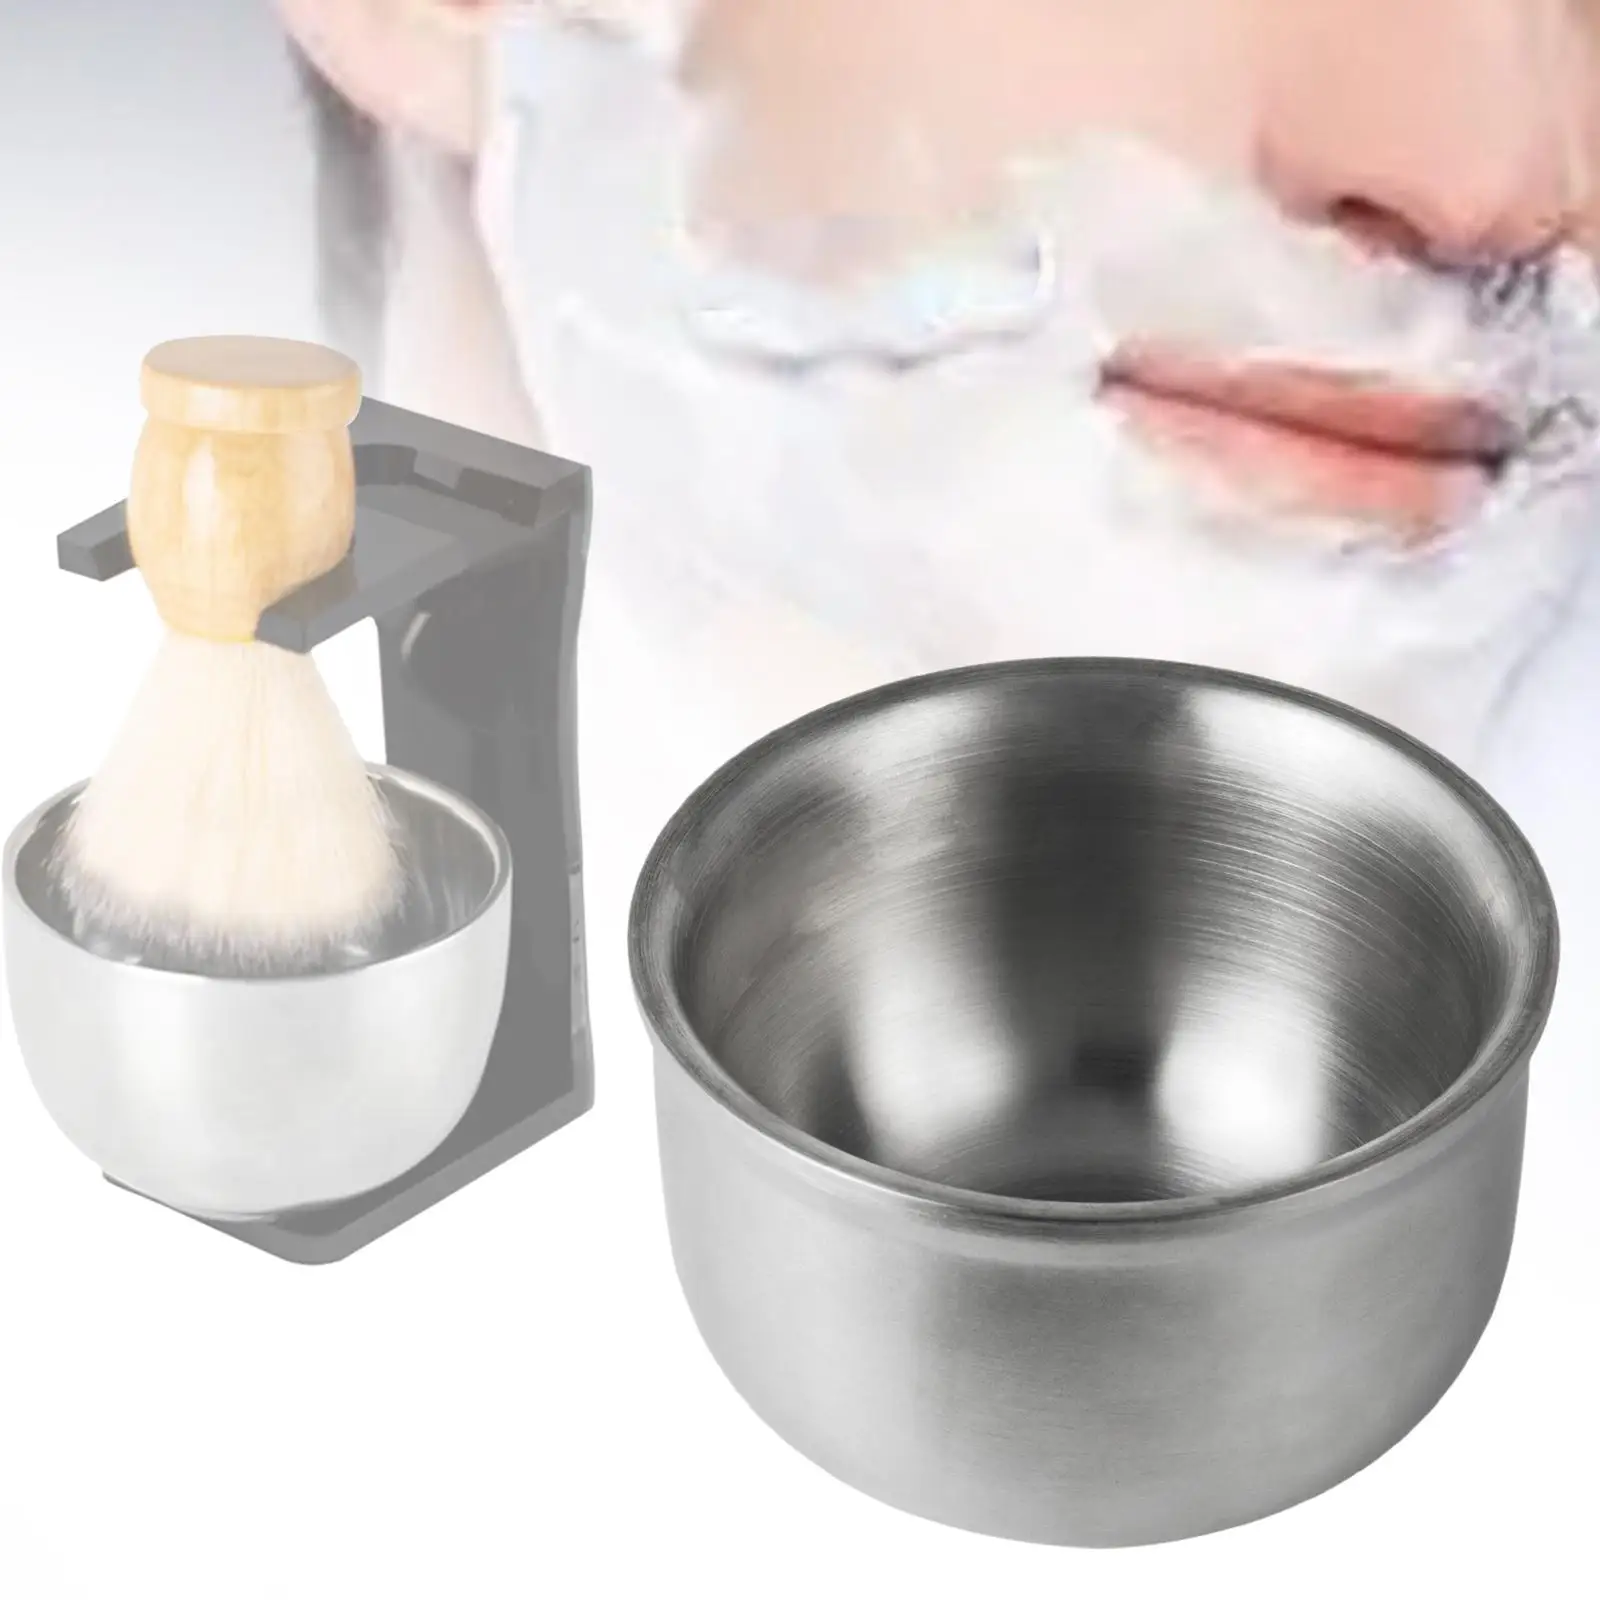 Shaving Bowl Produce Rich Foam Heat Insulation Keep Warm Better Fits Wet Shaving Shaving Cup Shave Soap Cup Shaving Mug for Gift